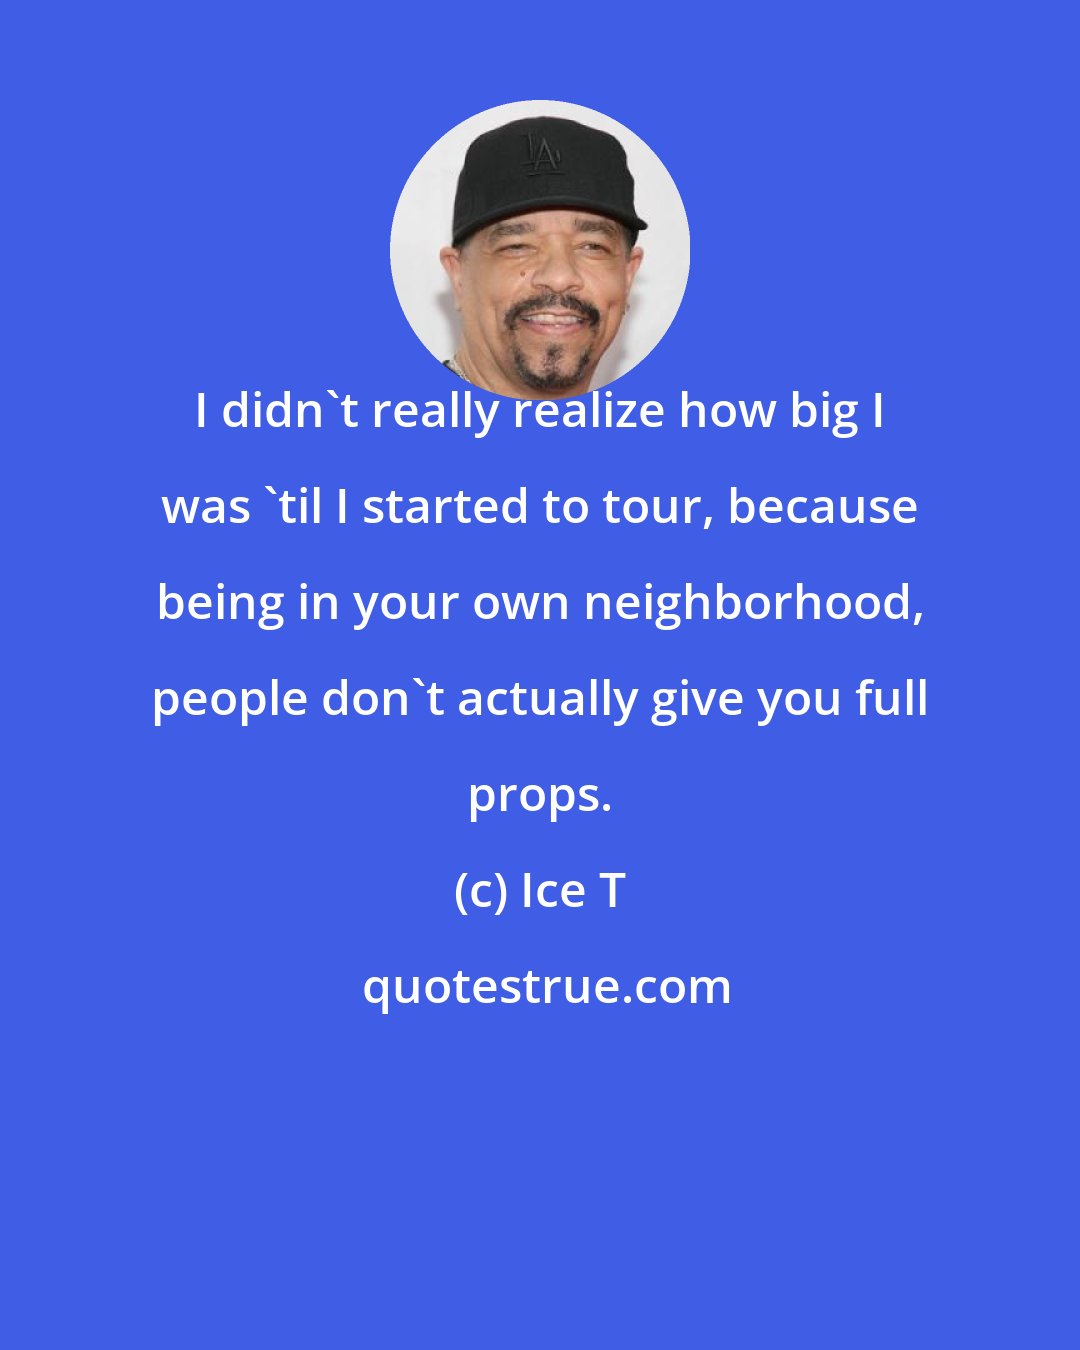 Ice T: I didn't really realize how big I was 'til I started to tour, because being in your own neighborhood, people don't actually give you full props.